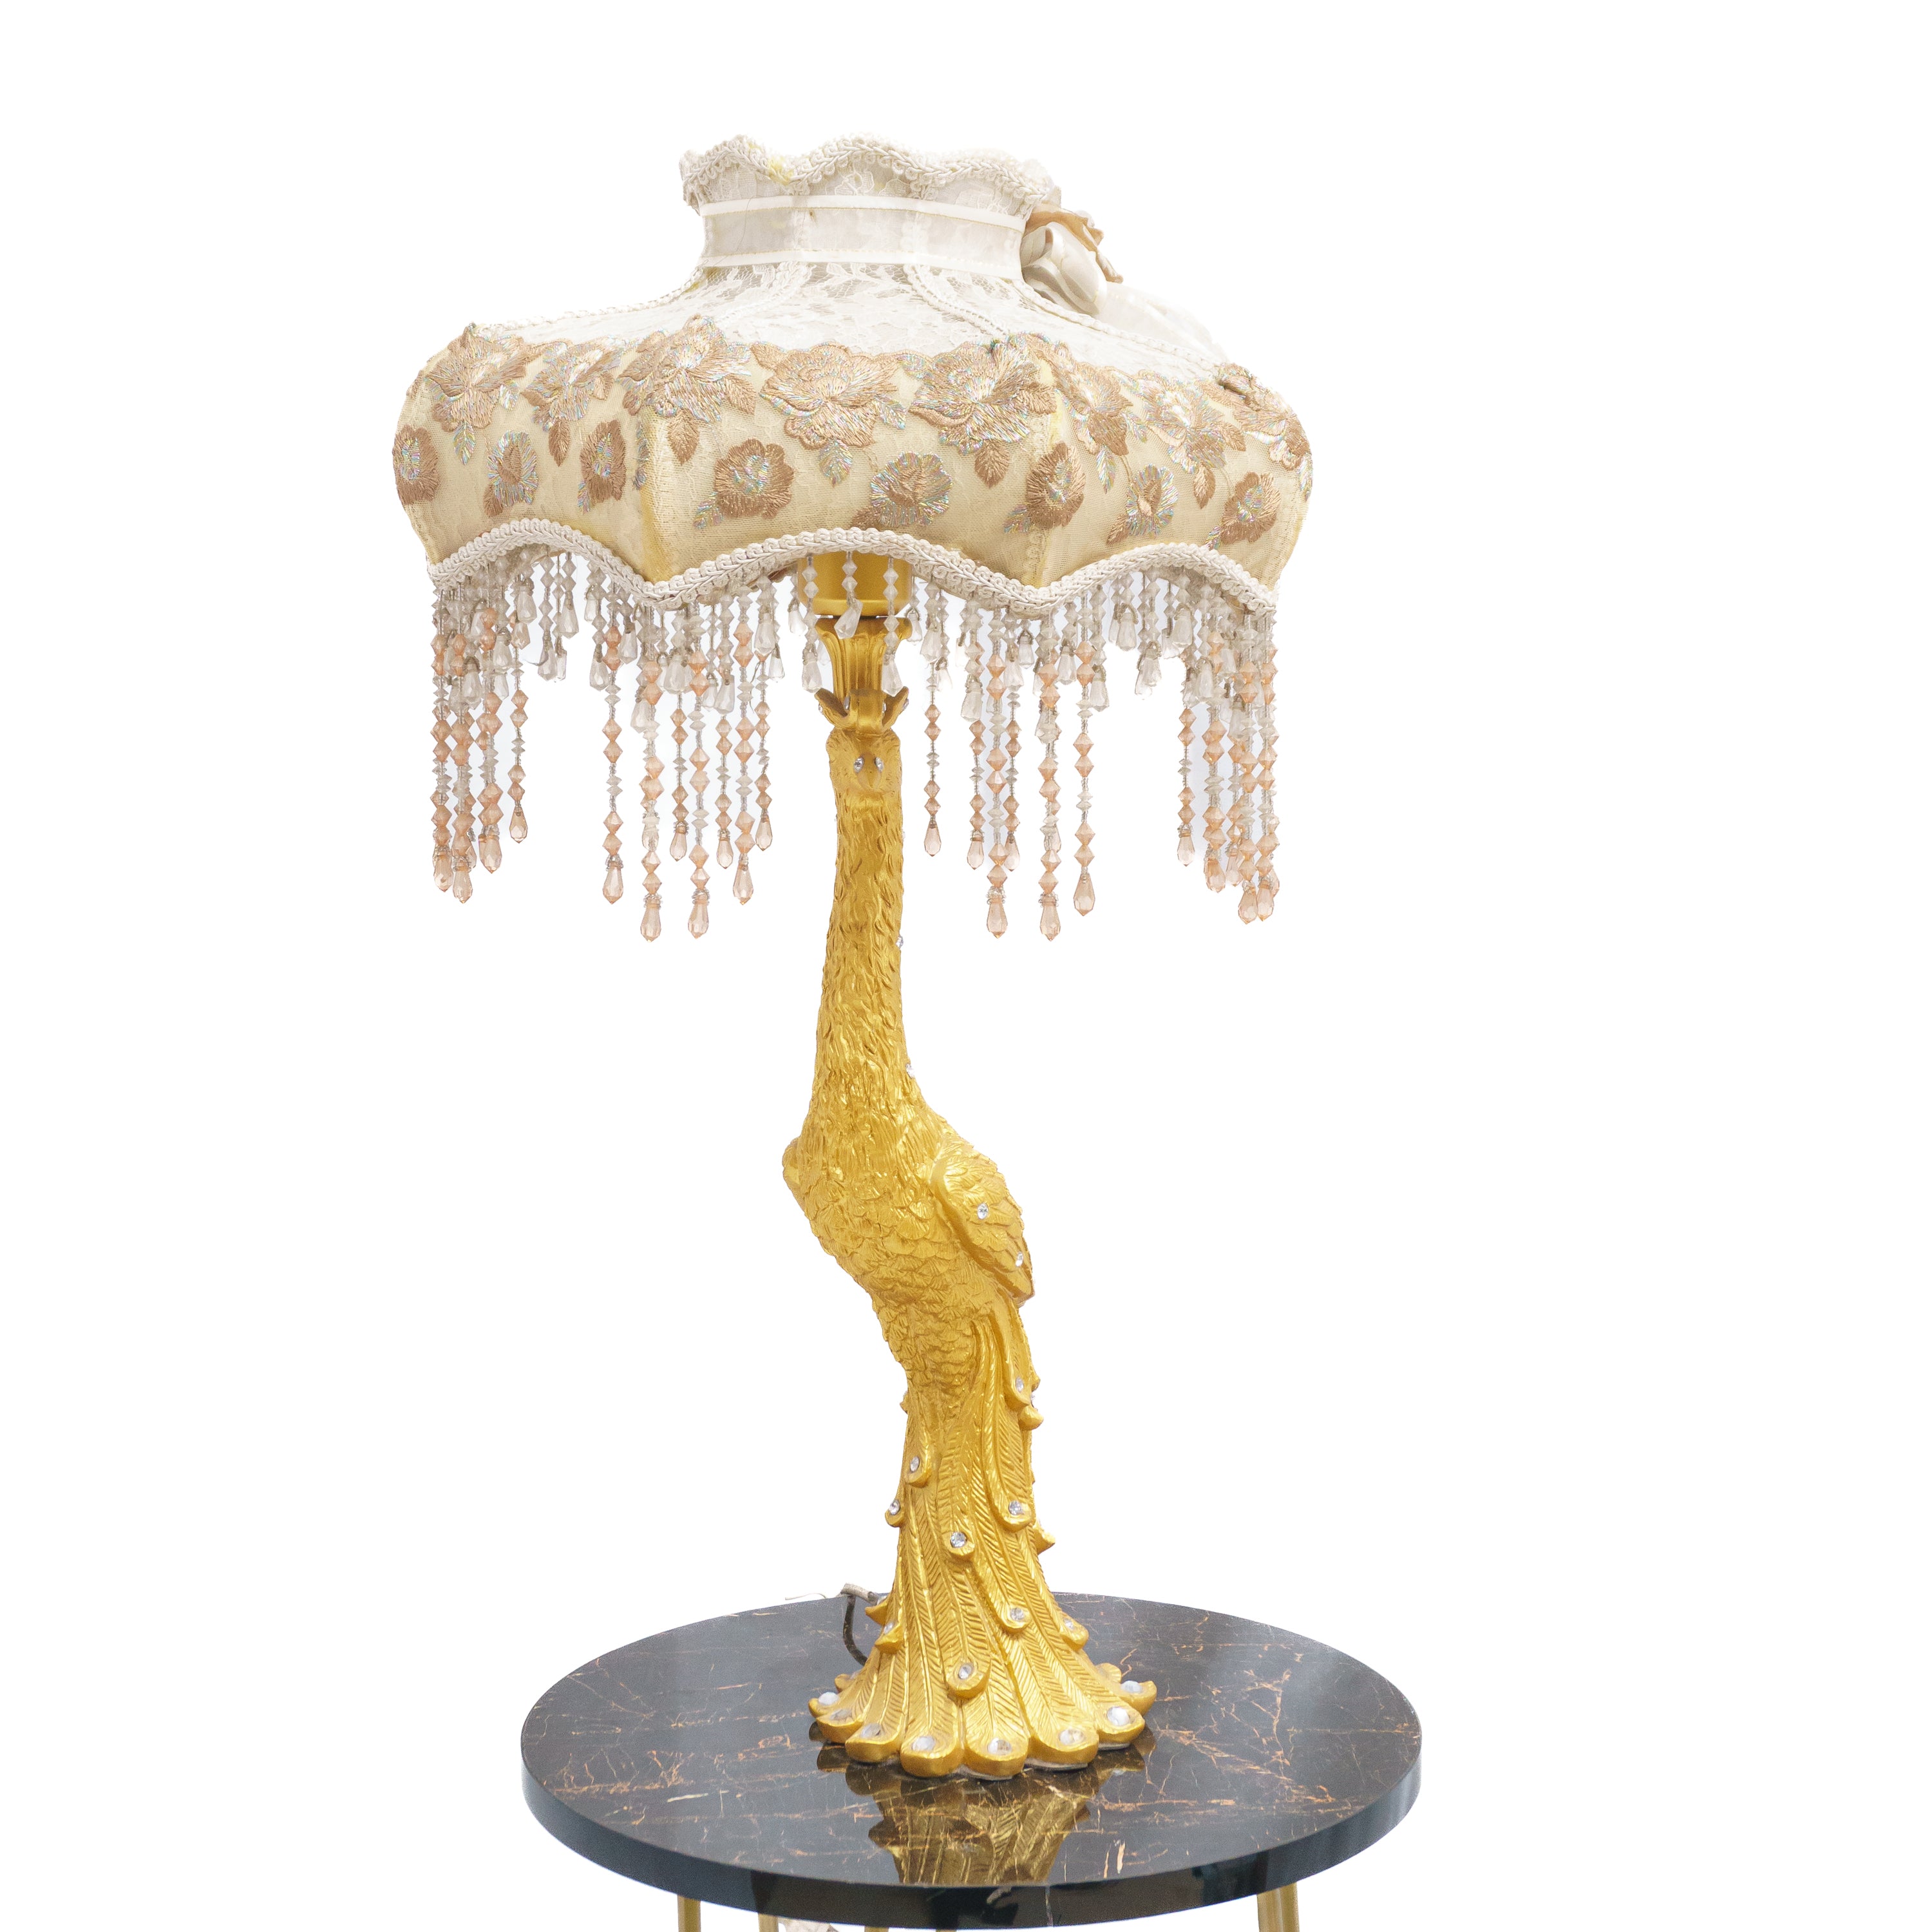 Off White Crown Theme Lamp Shade with Attractive Golden Peacock Lamp Stand